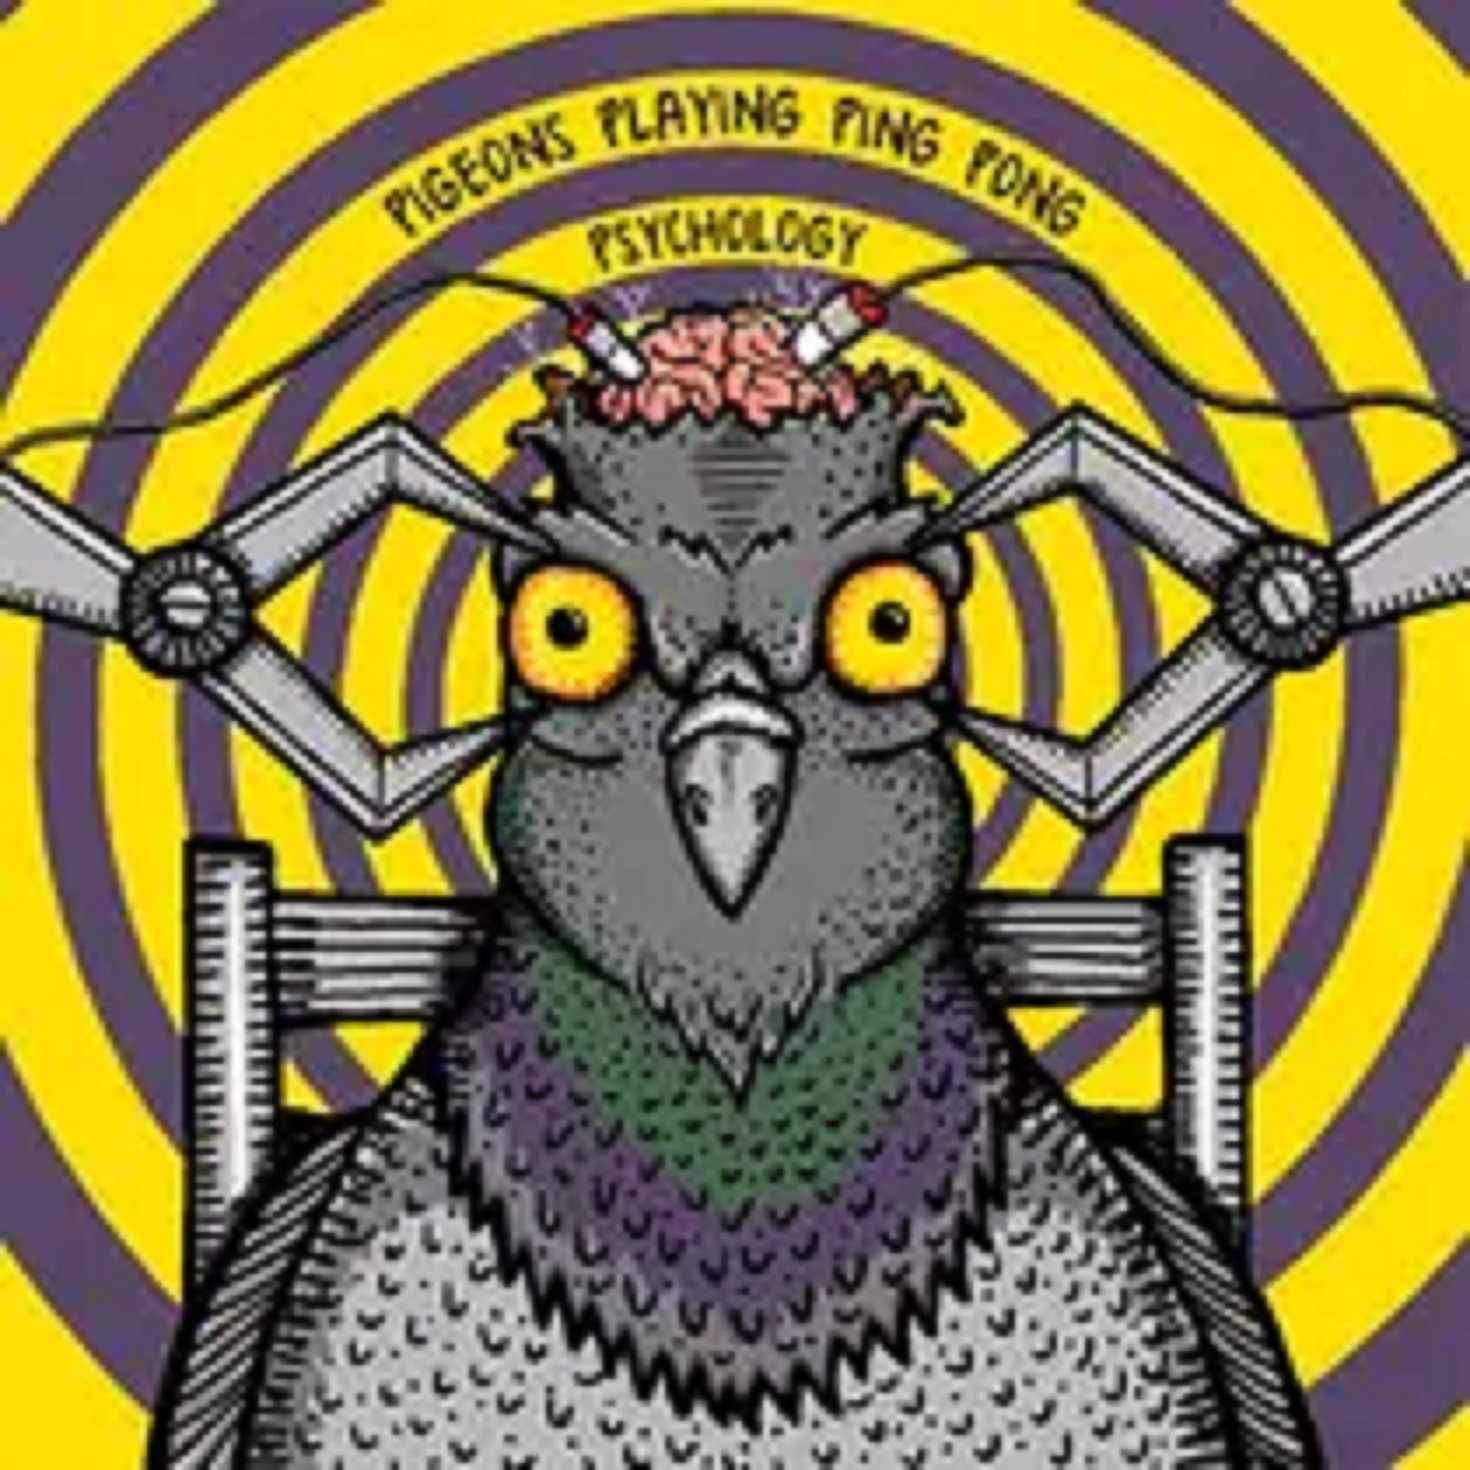 Pigeons Playing Ping Pong | Psychology | New Music Review